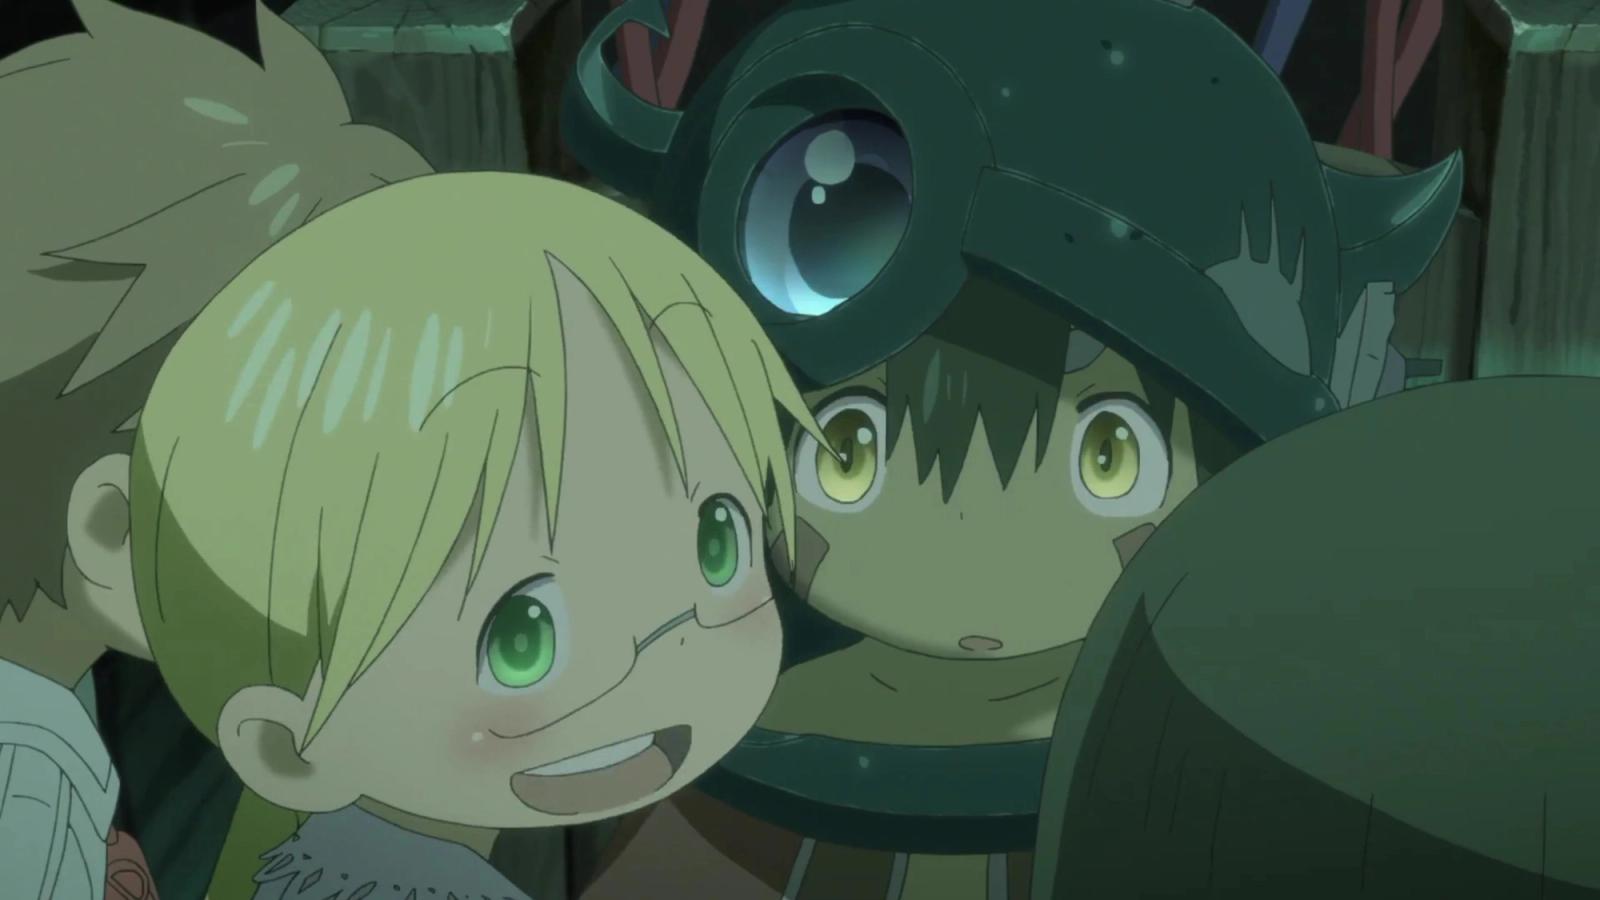 Made in Abyss Manga Vs Anime: Voice Acting